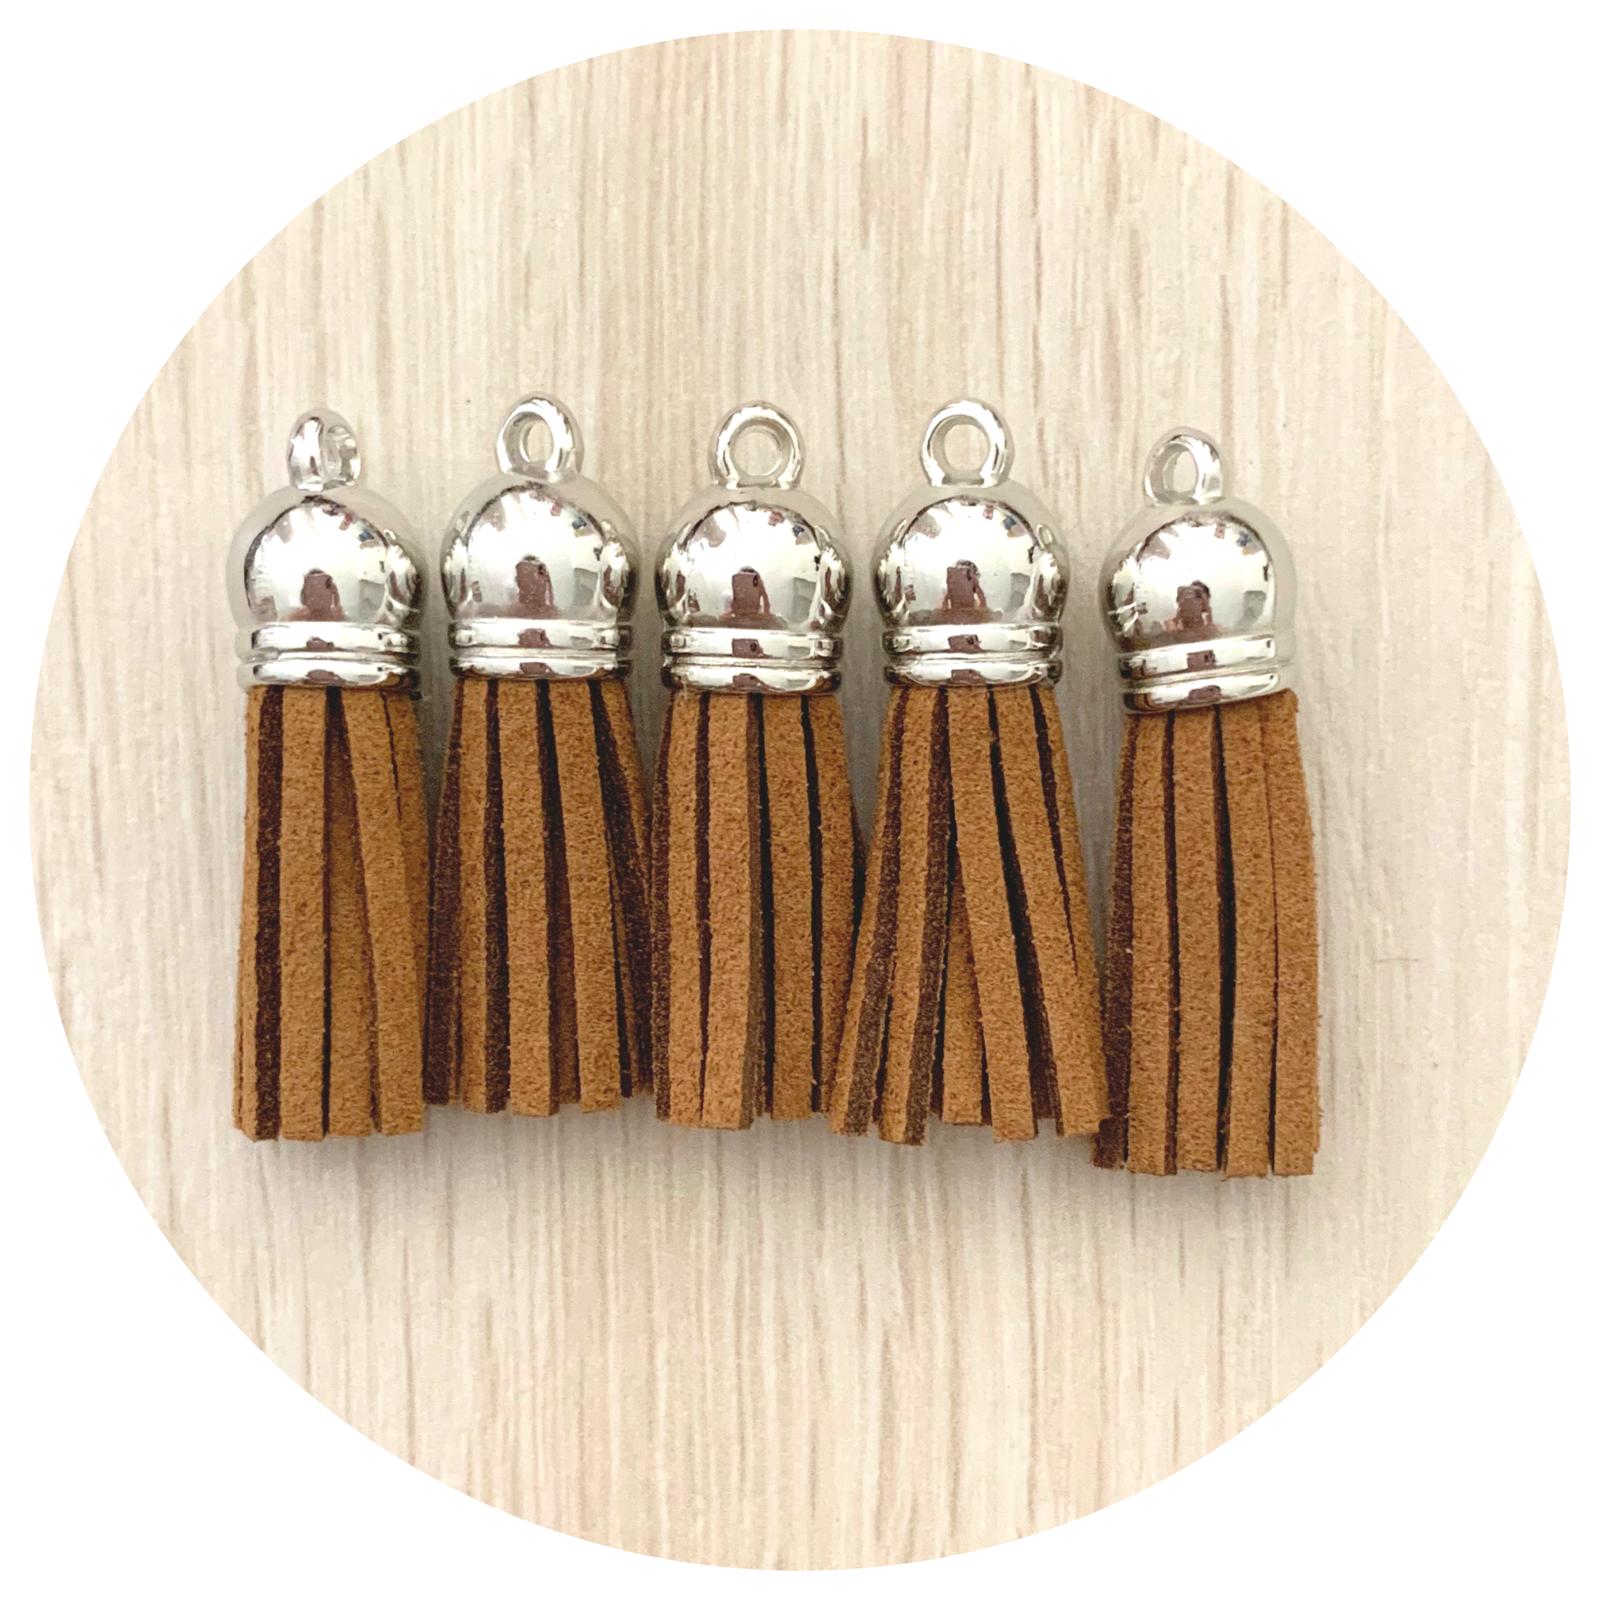 39mm Suede Tassels Silver Cap - Cocoa - Each